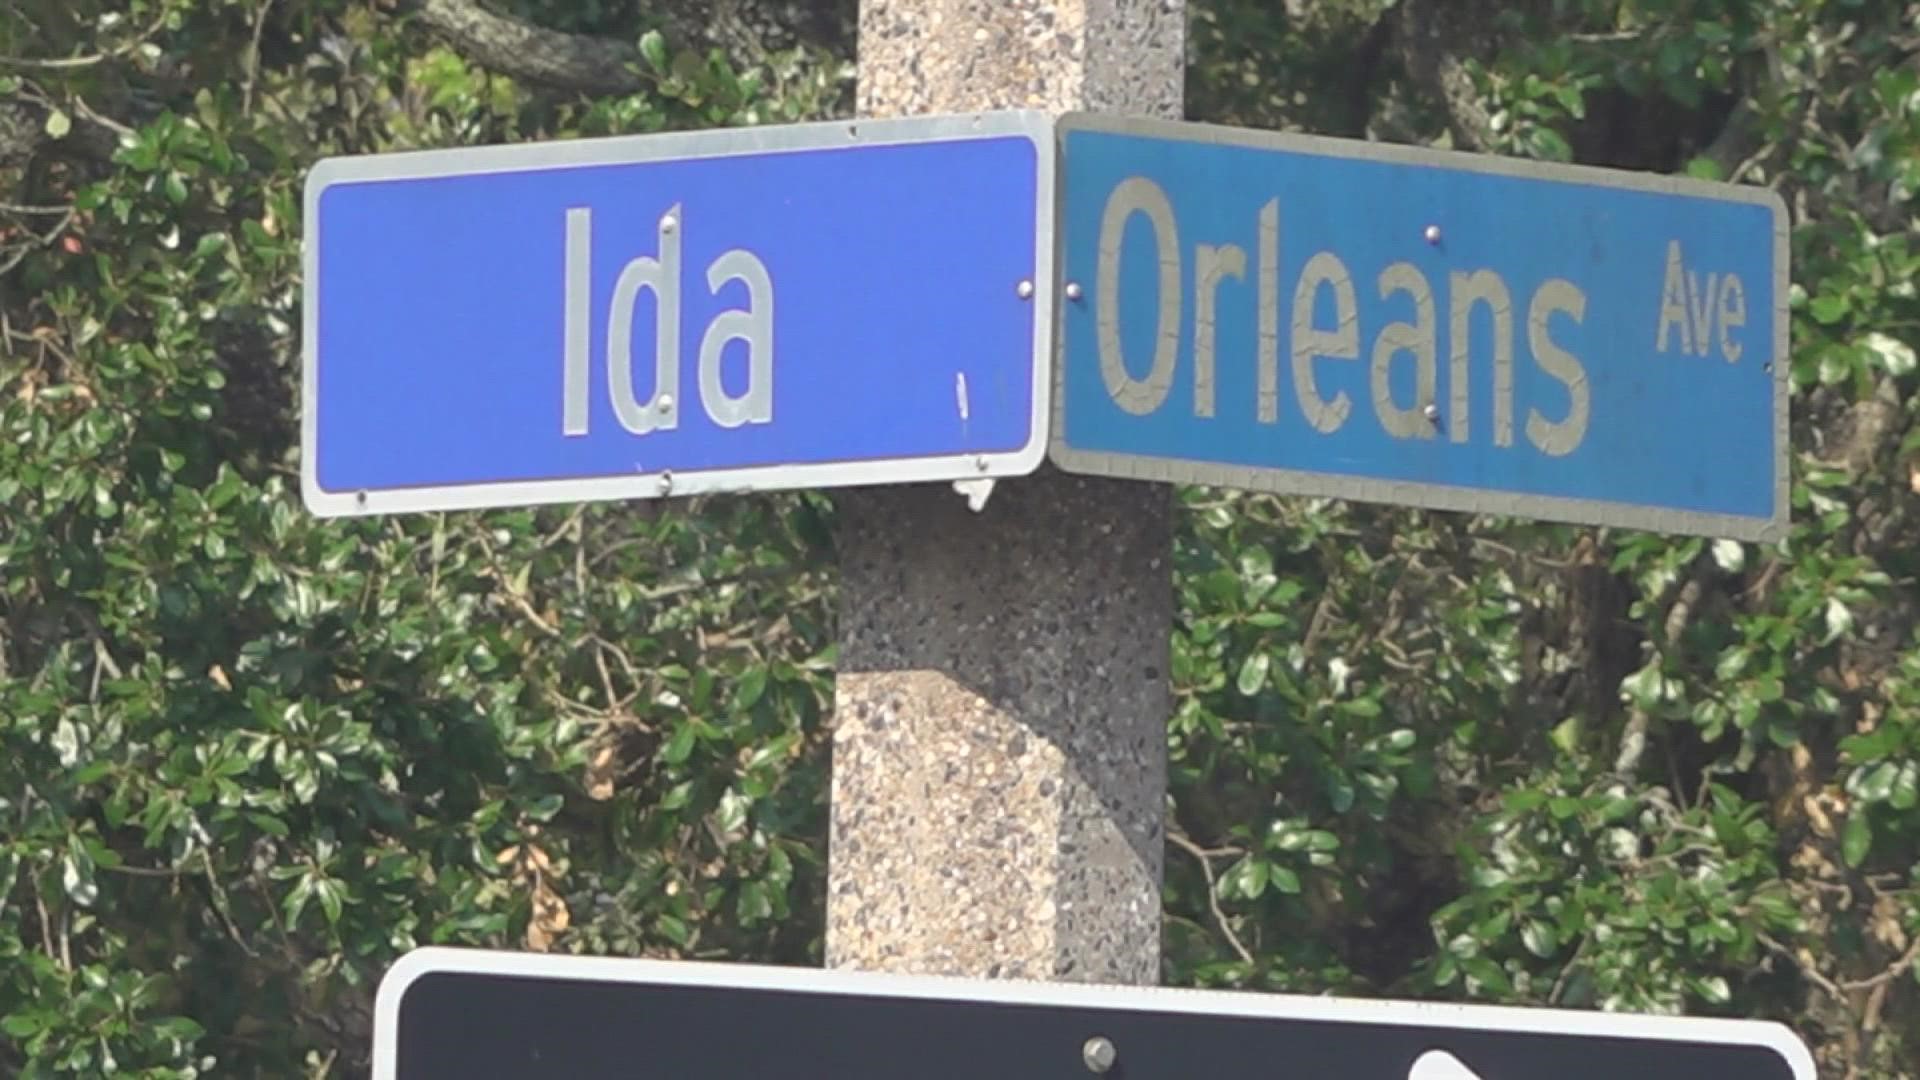 Ida Street is just off Orleans Avenue in the city. The street is about 500 feet long and has a name that, right now, is hard to forget.